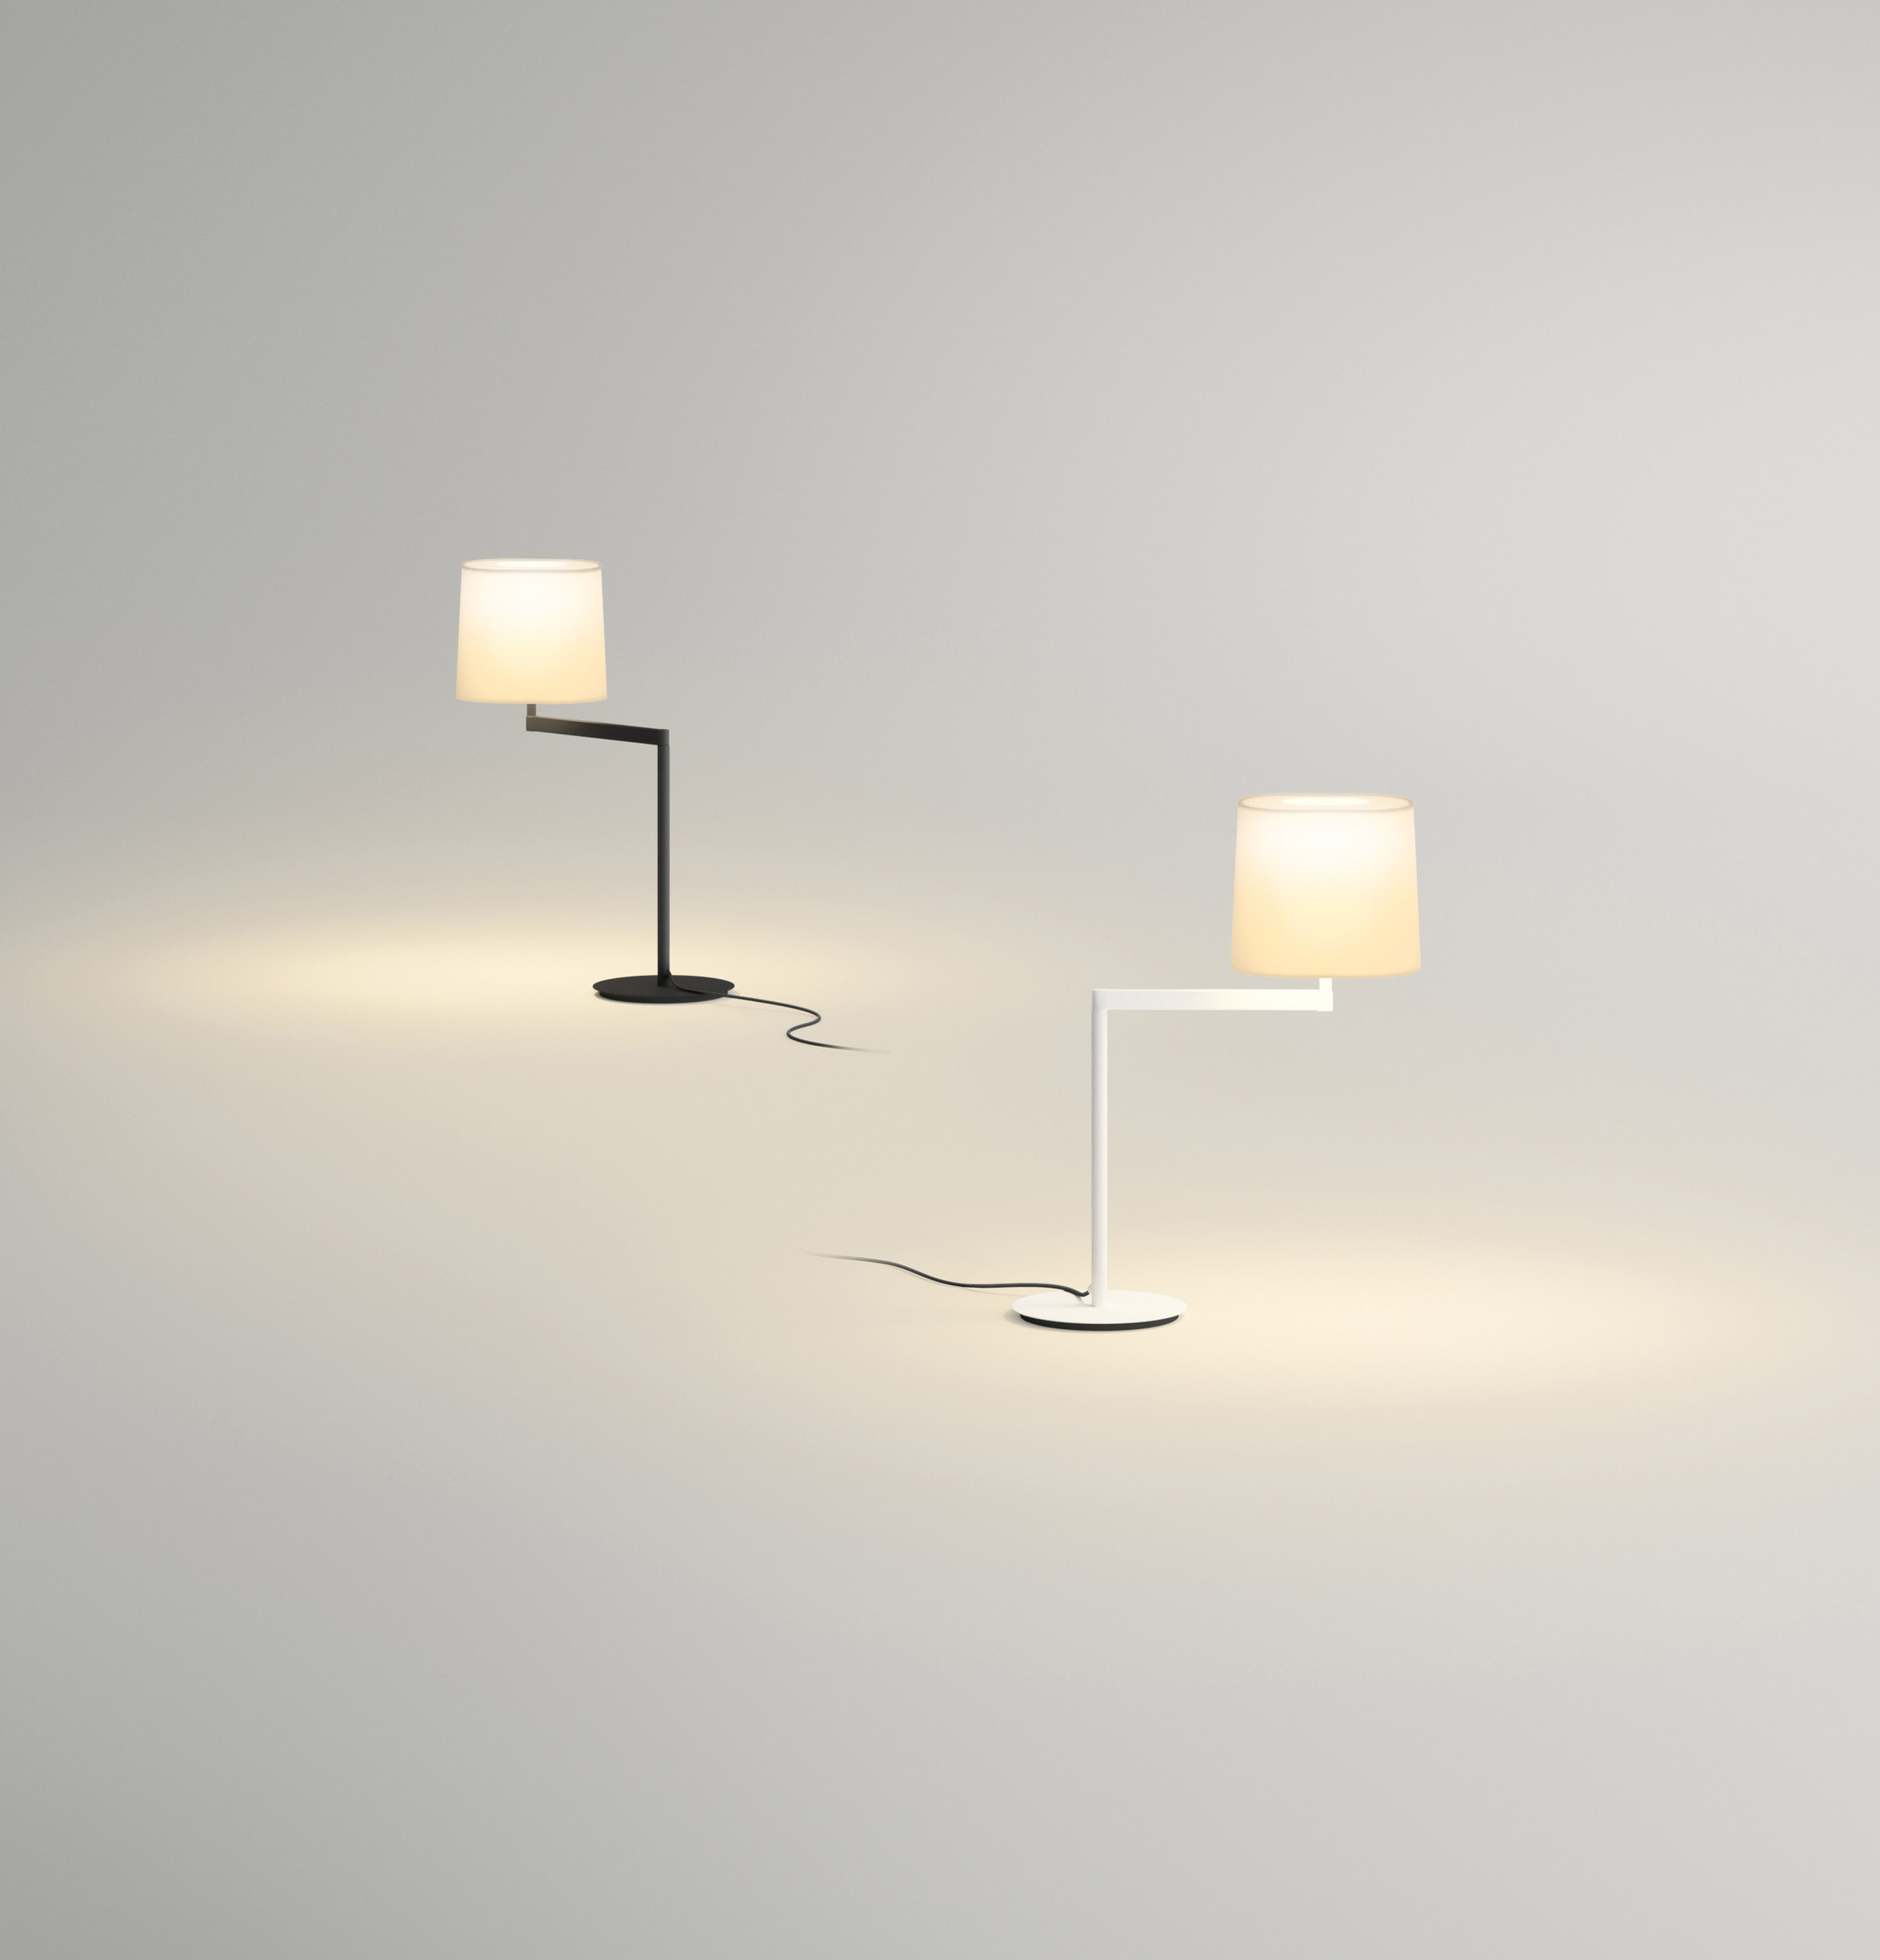 Competition: win a Vibia table lamp designed by Lievore Altherr Molina